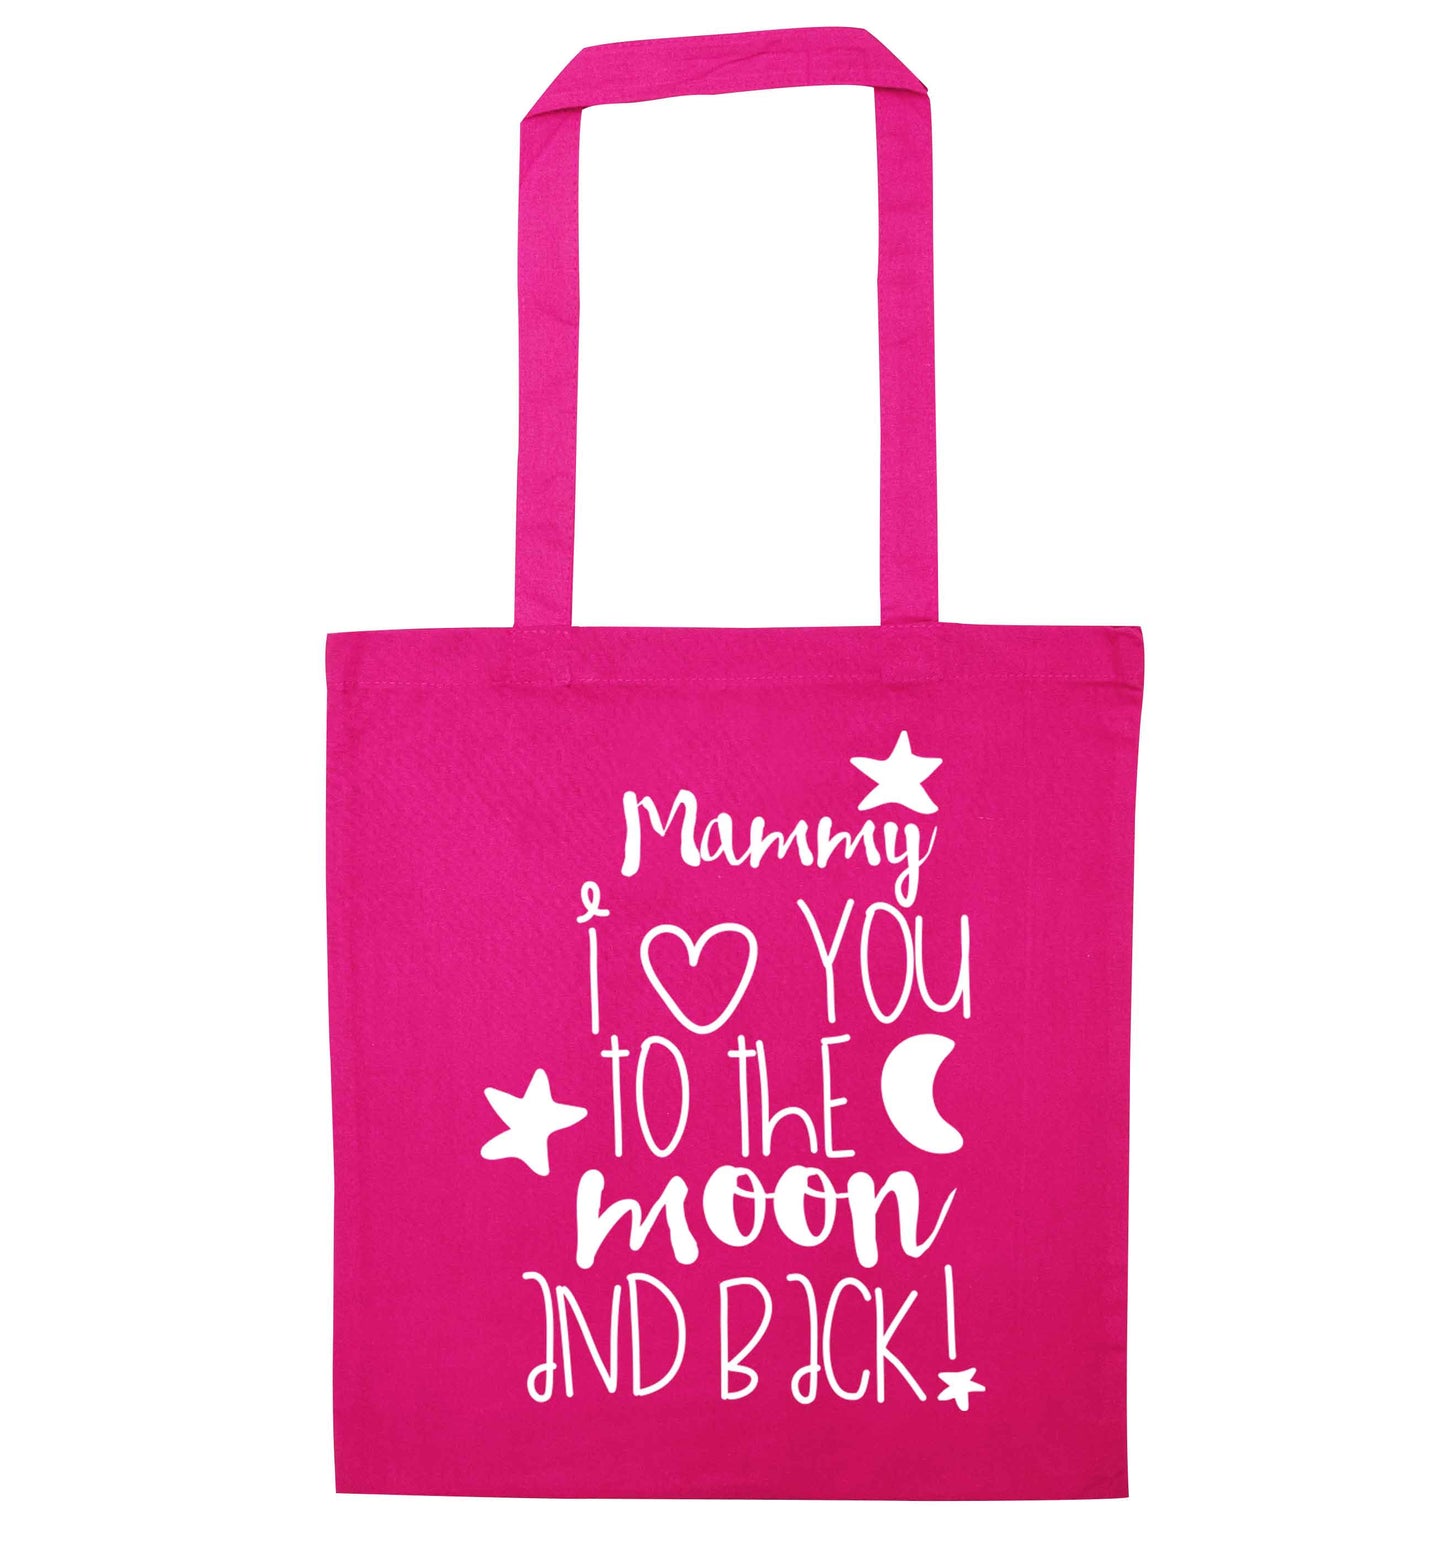 Mammy I love you to the moon and back pink tote bag